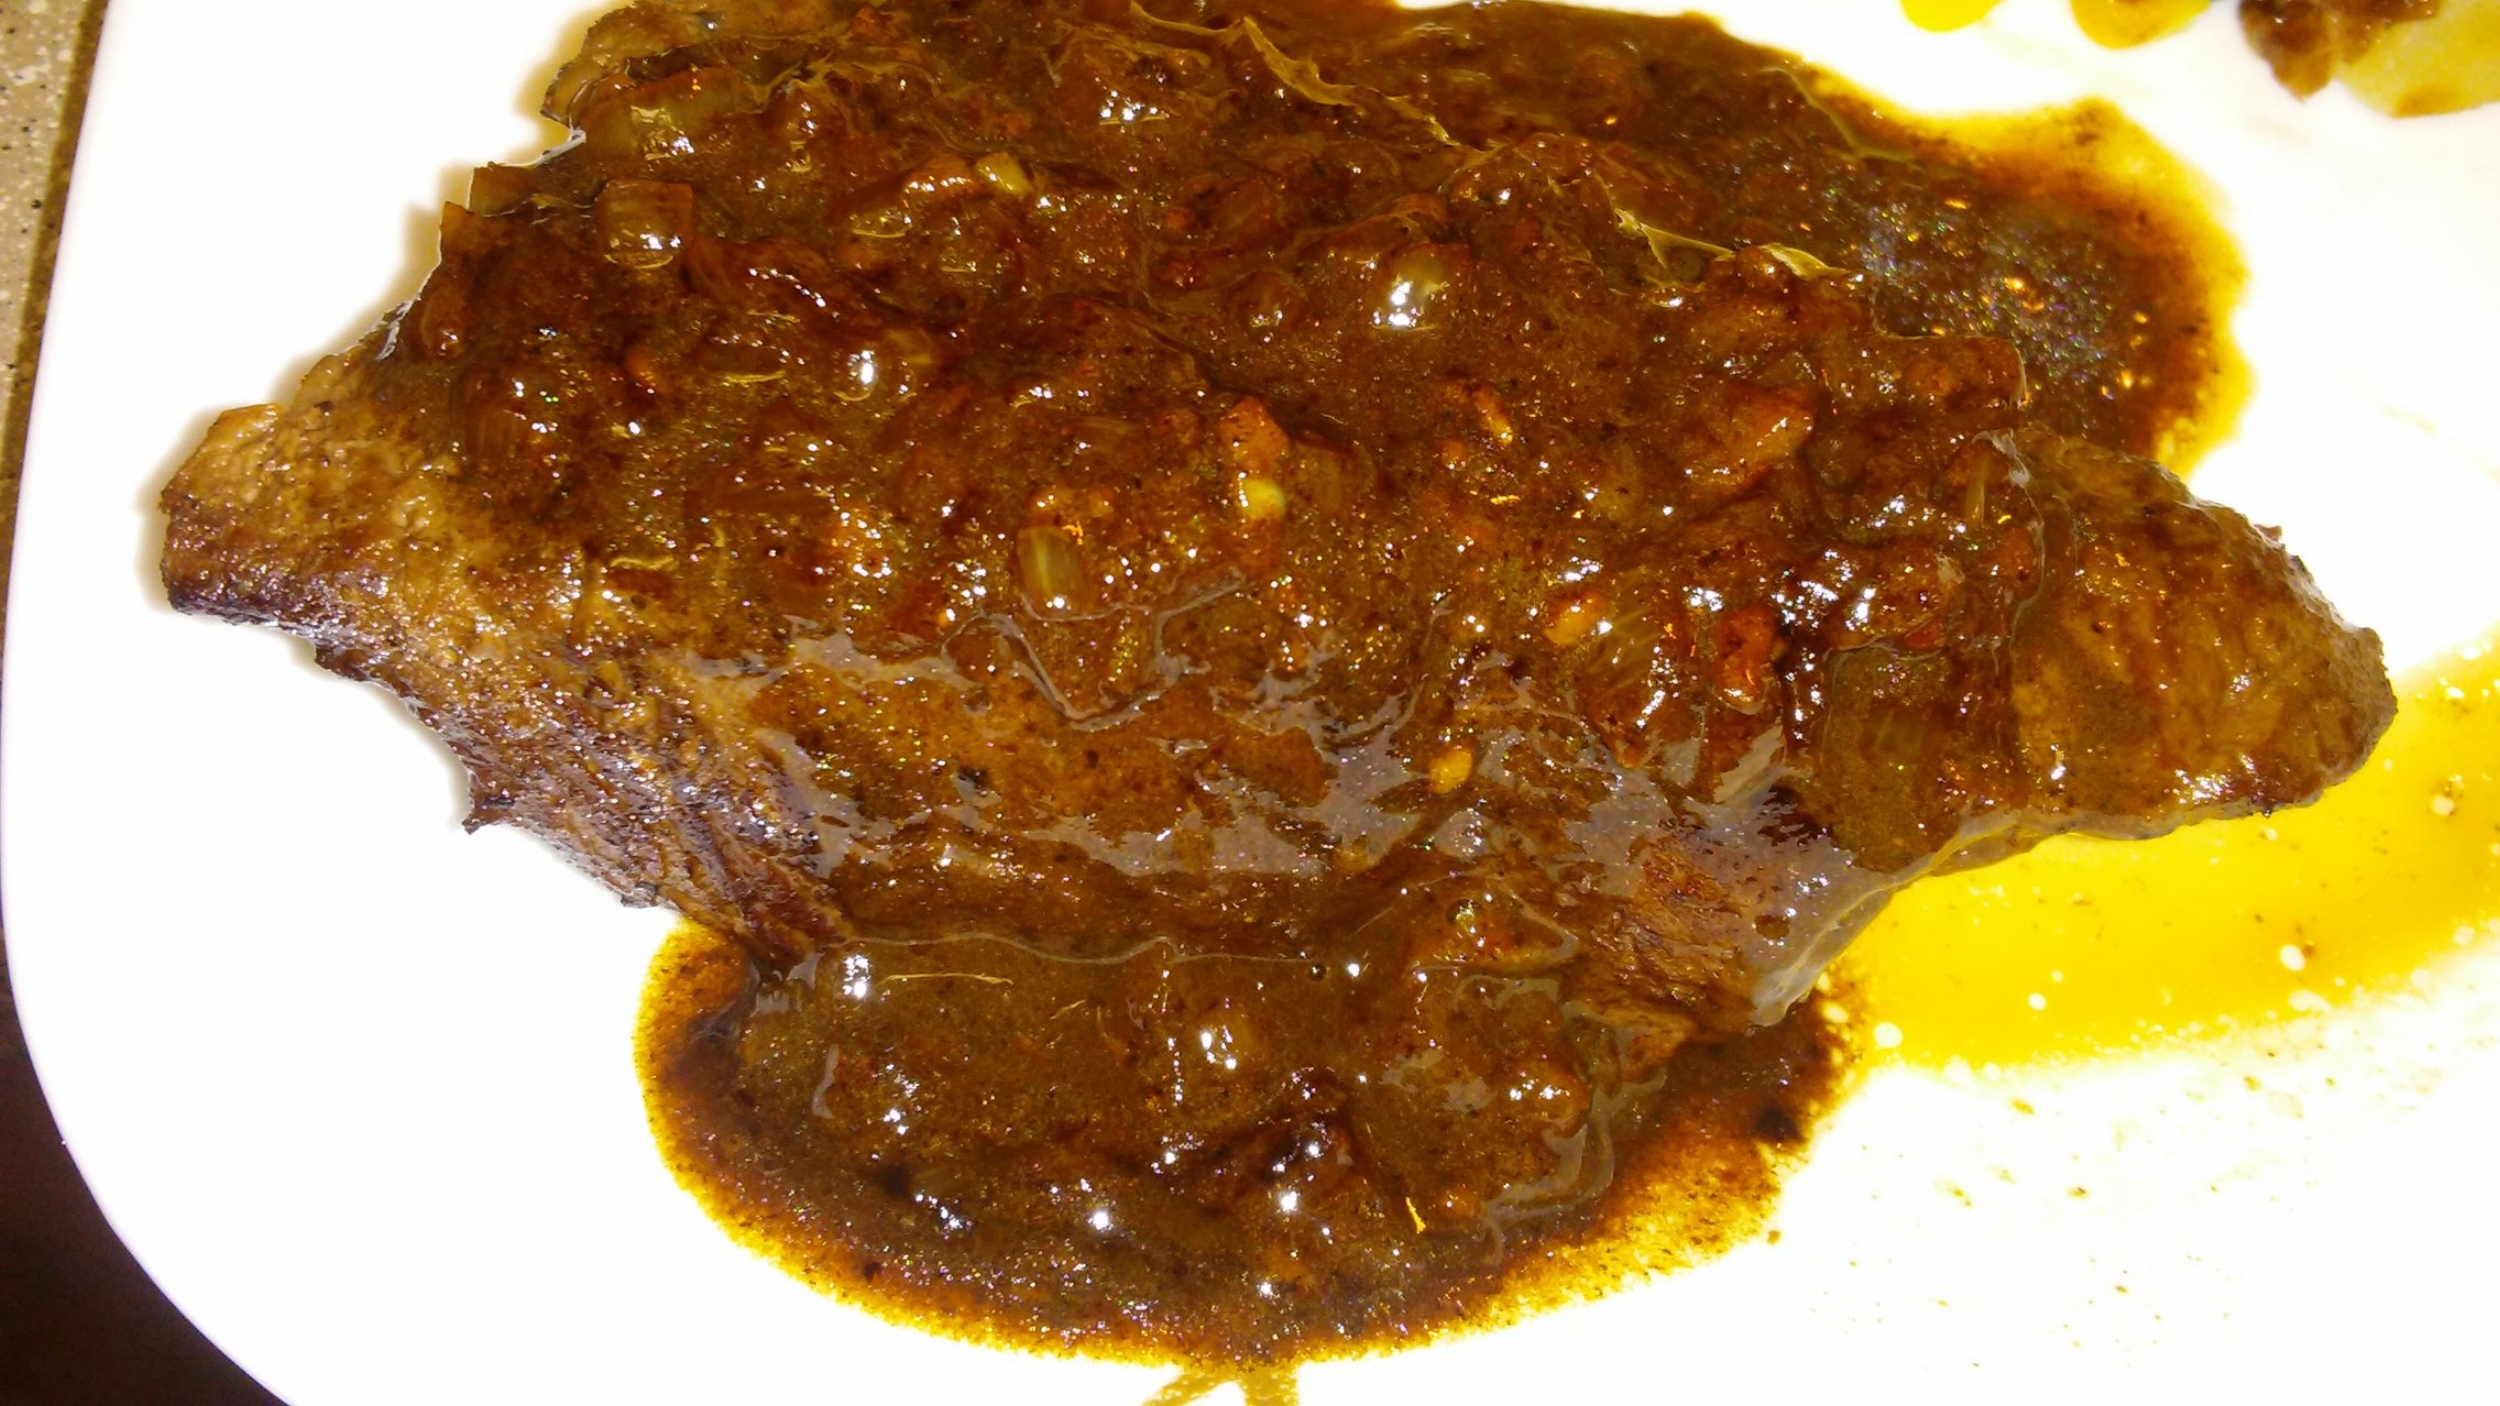 Yummy, tender steak with a savory sauce